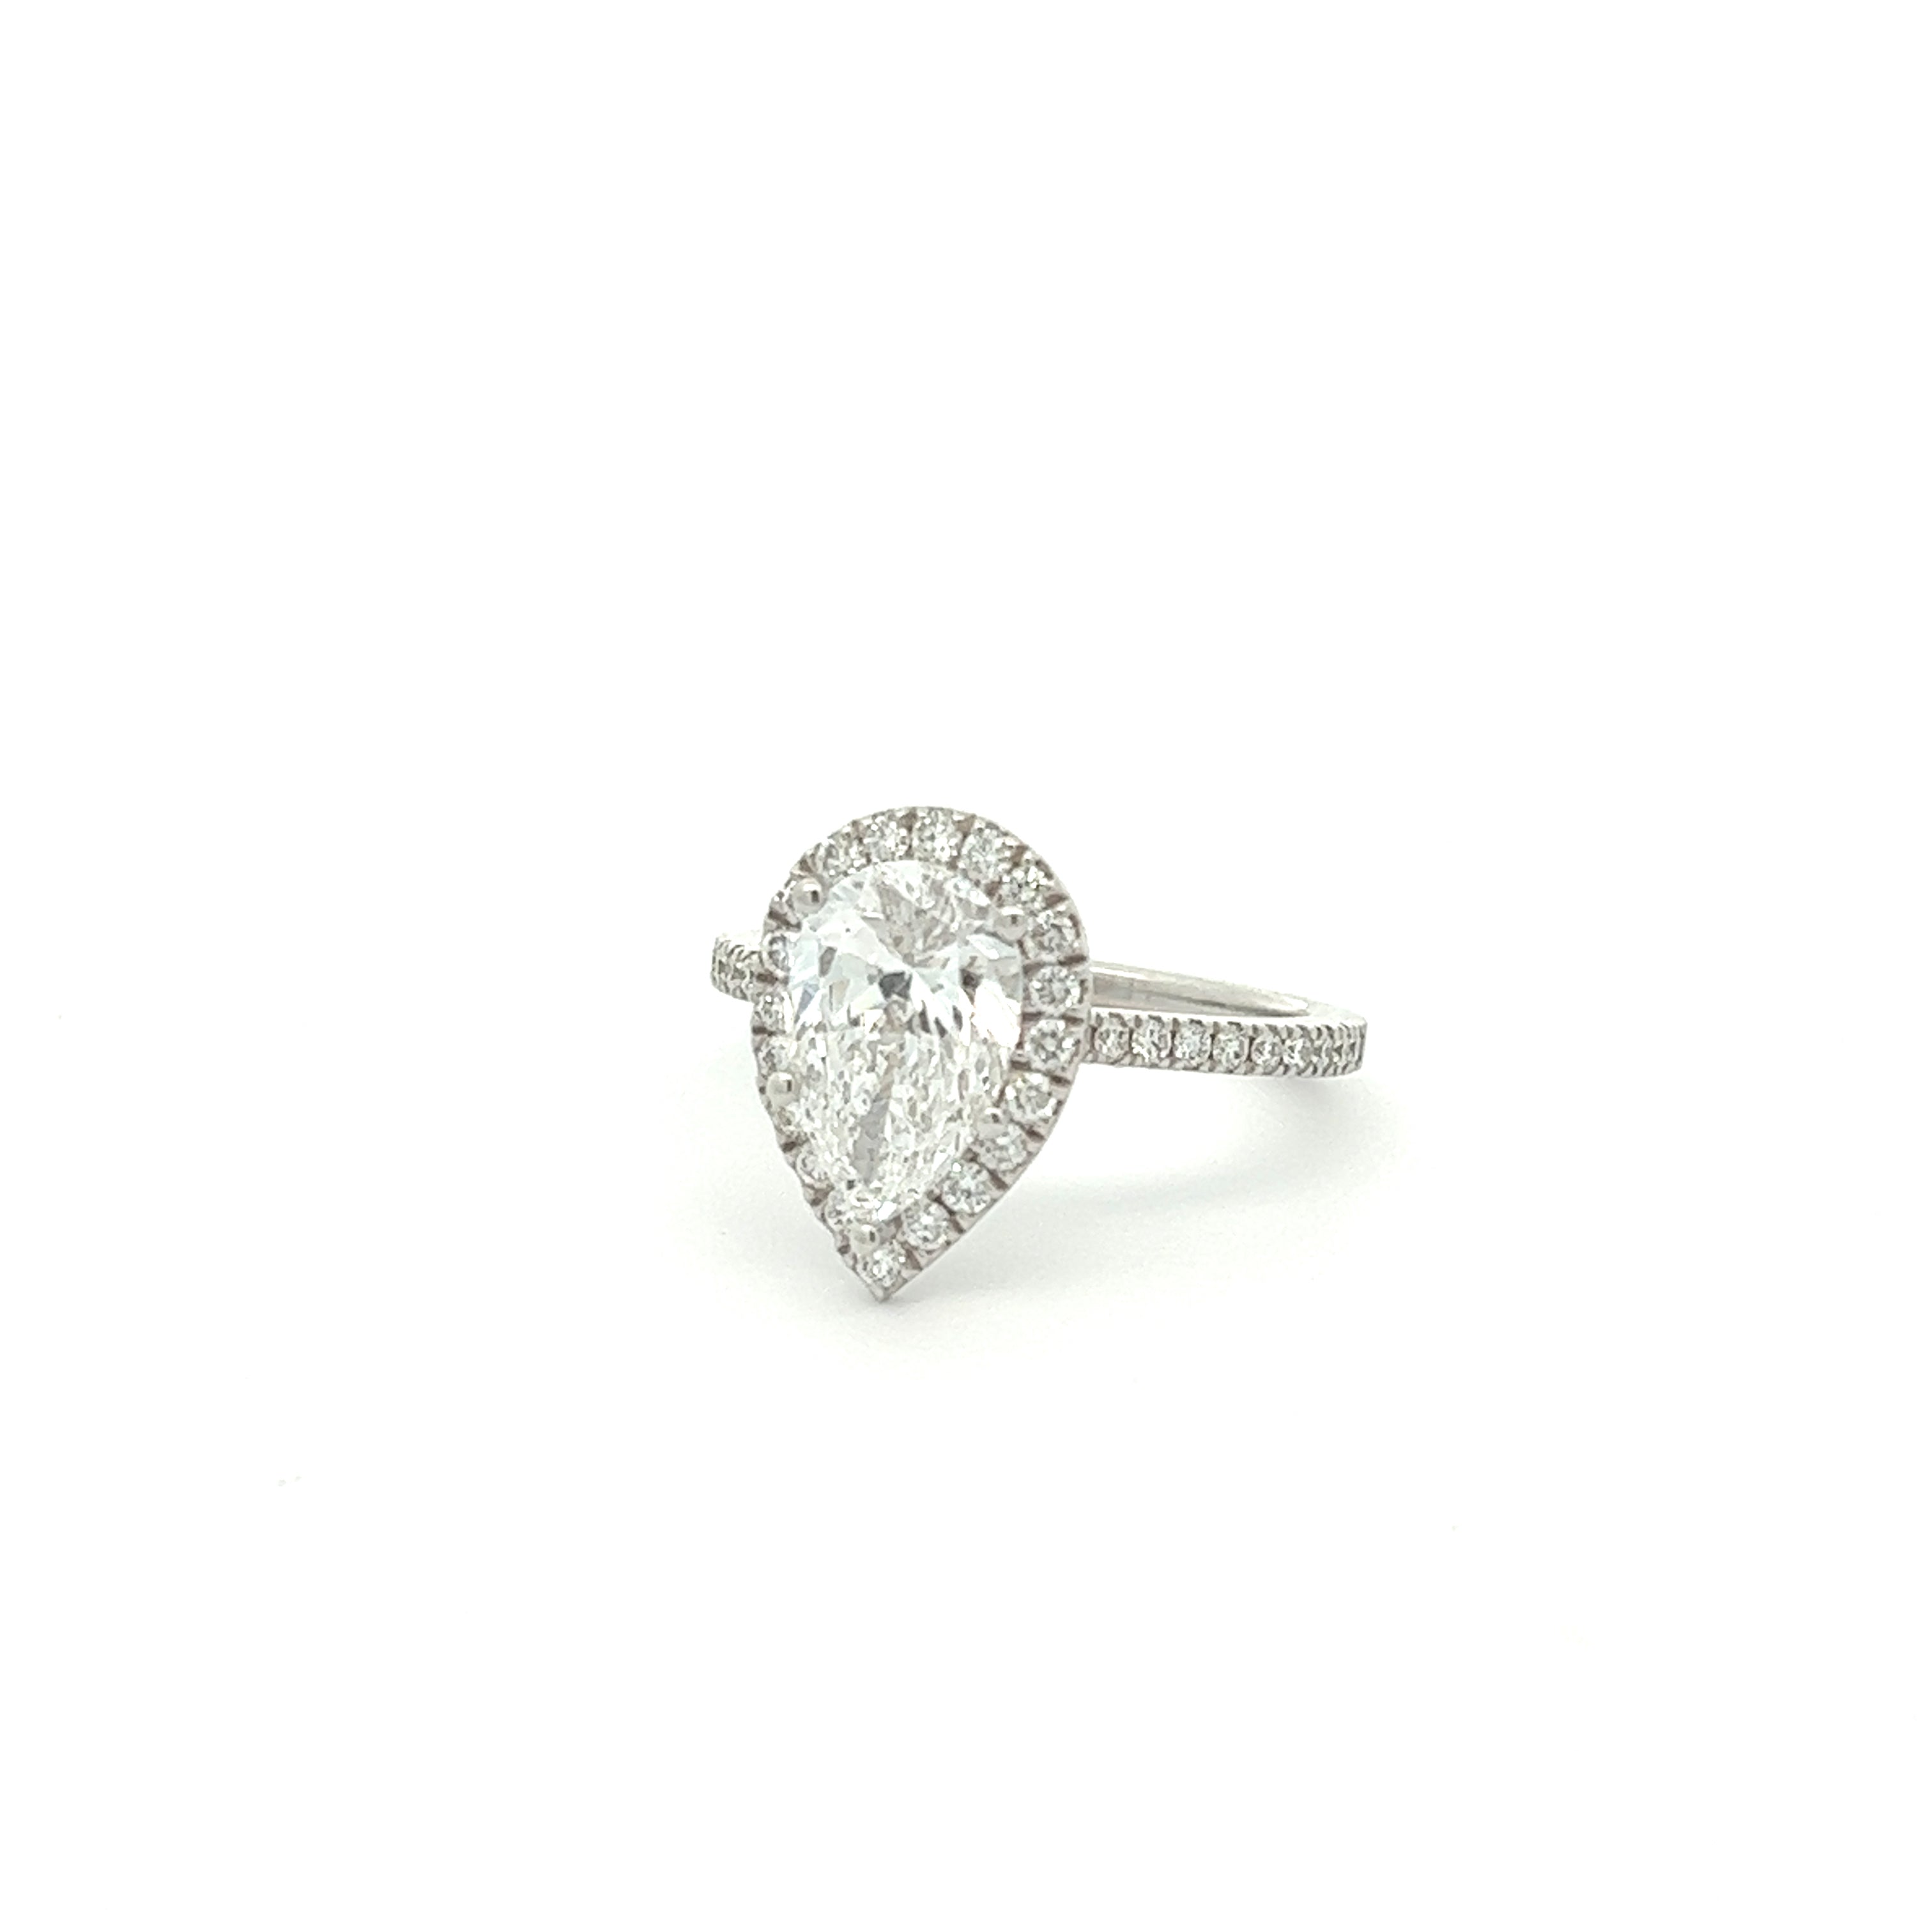 The Terry 18k White Gold Pear Shaped Engagement Ring